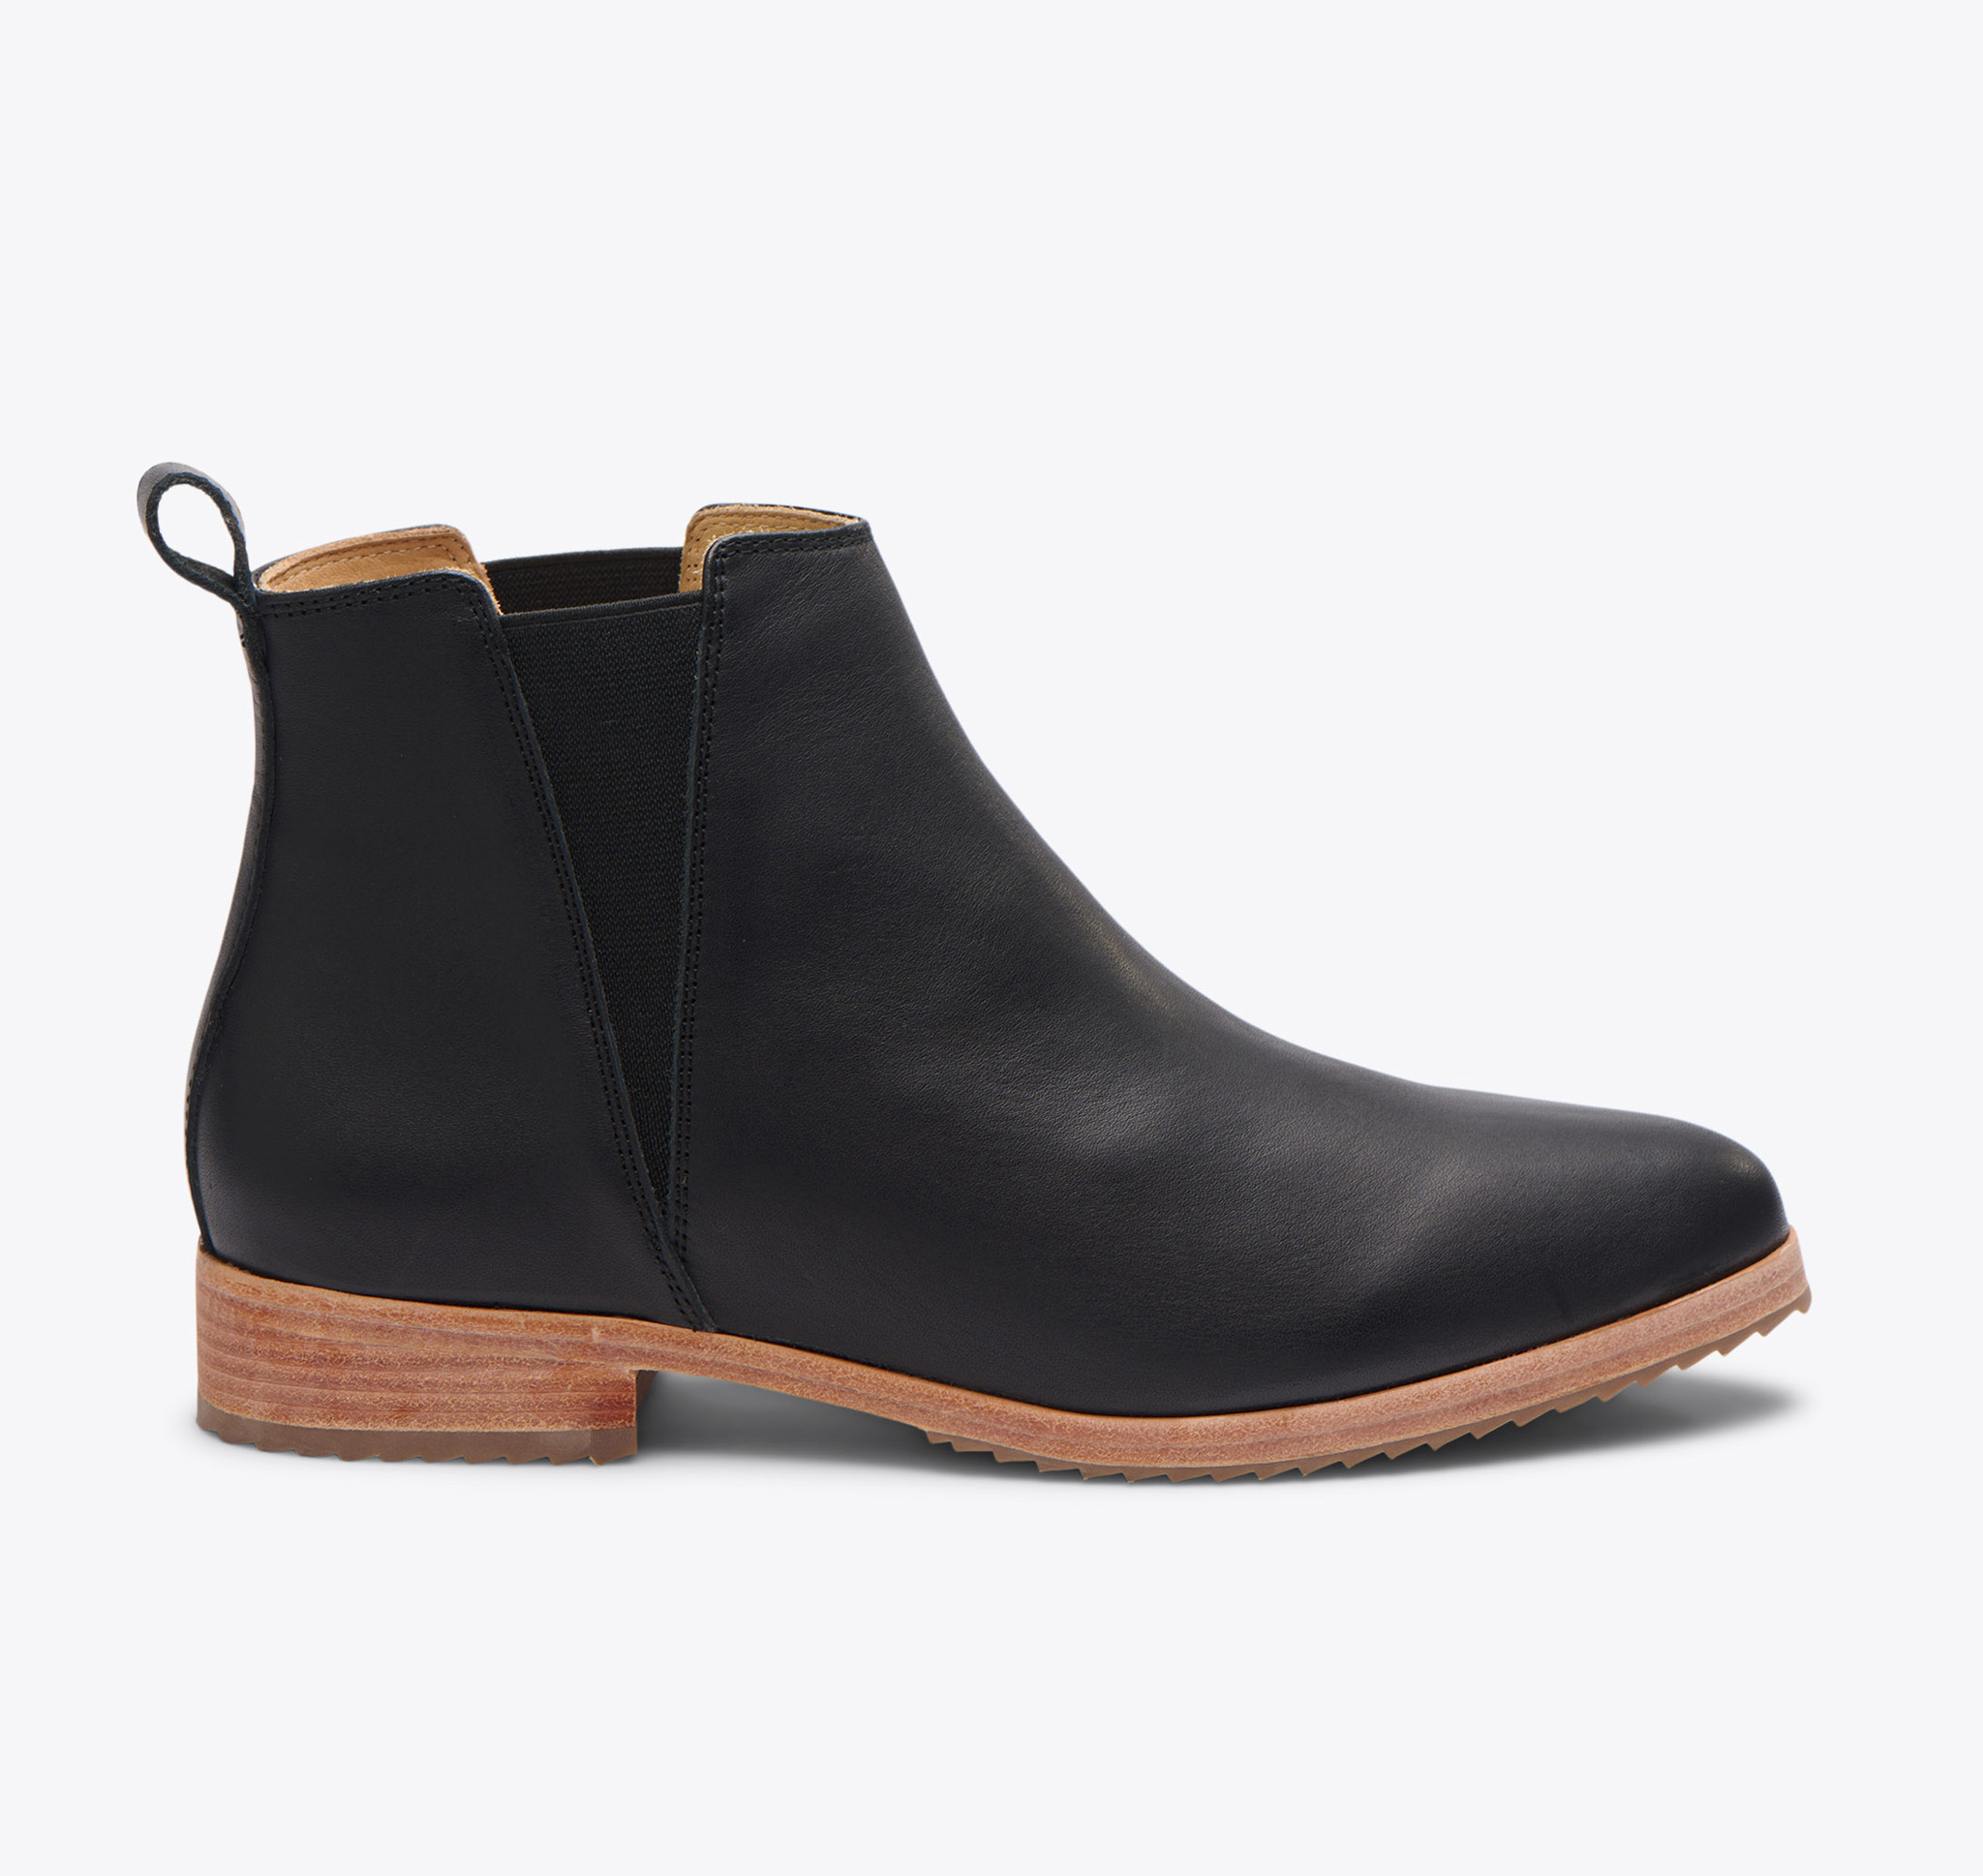 Nisolo Everyday Chelsea Boot Black - Every Nisolo product is built on the foundation of comfort, function, and design. 